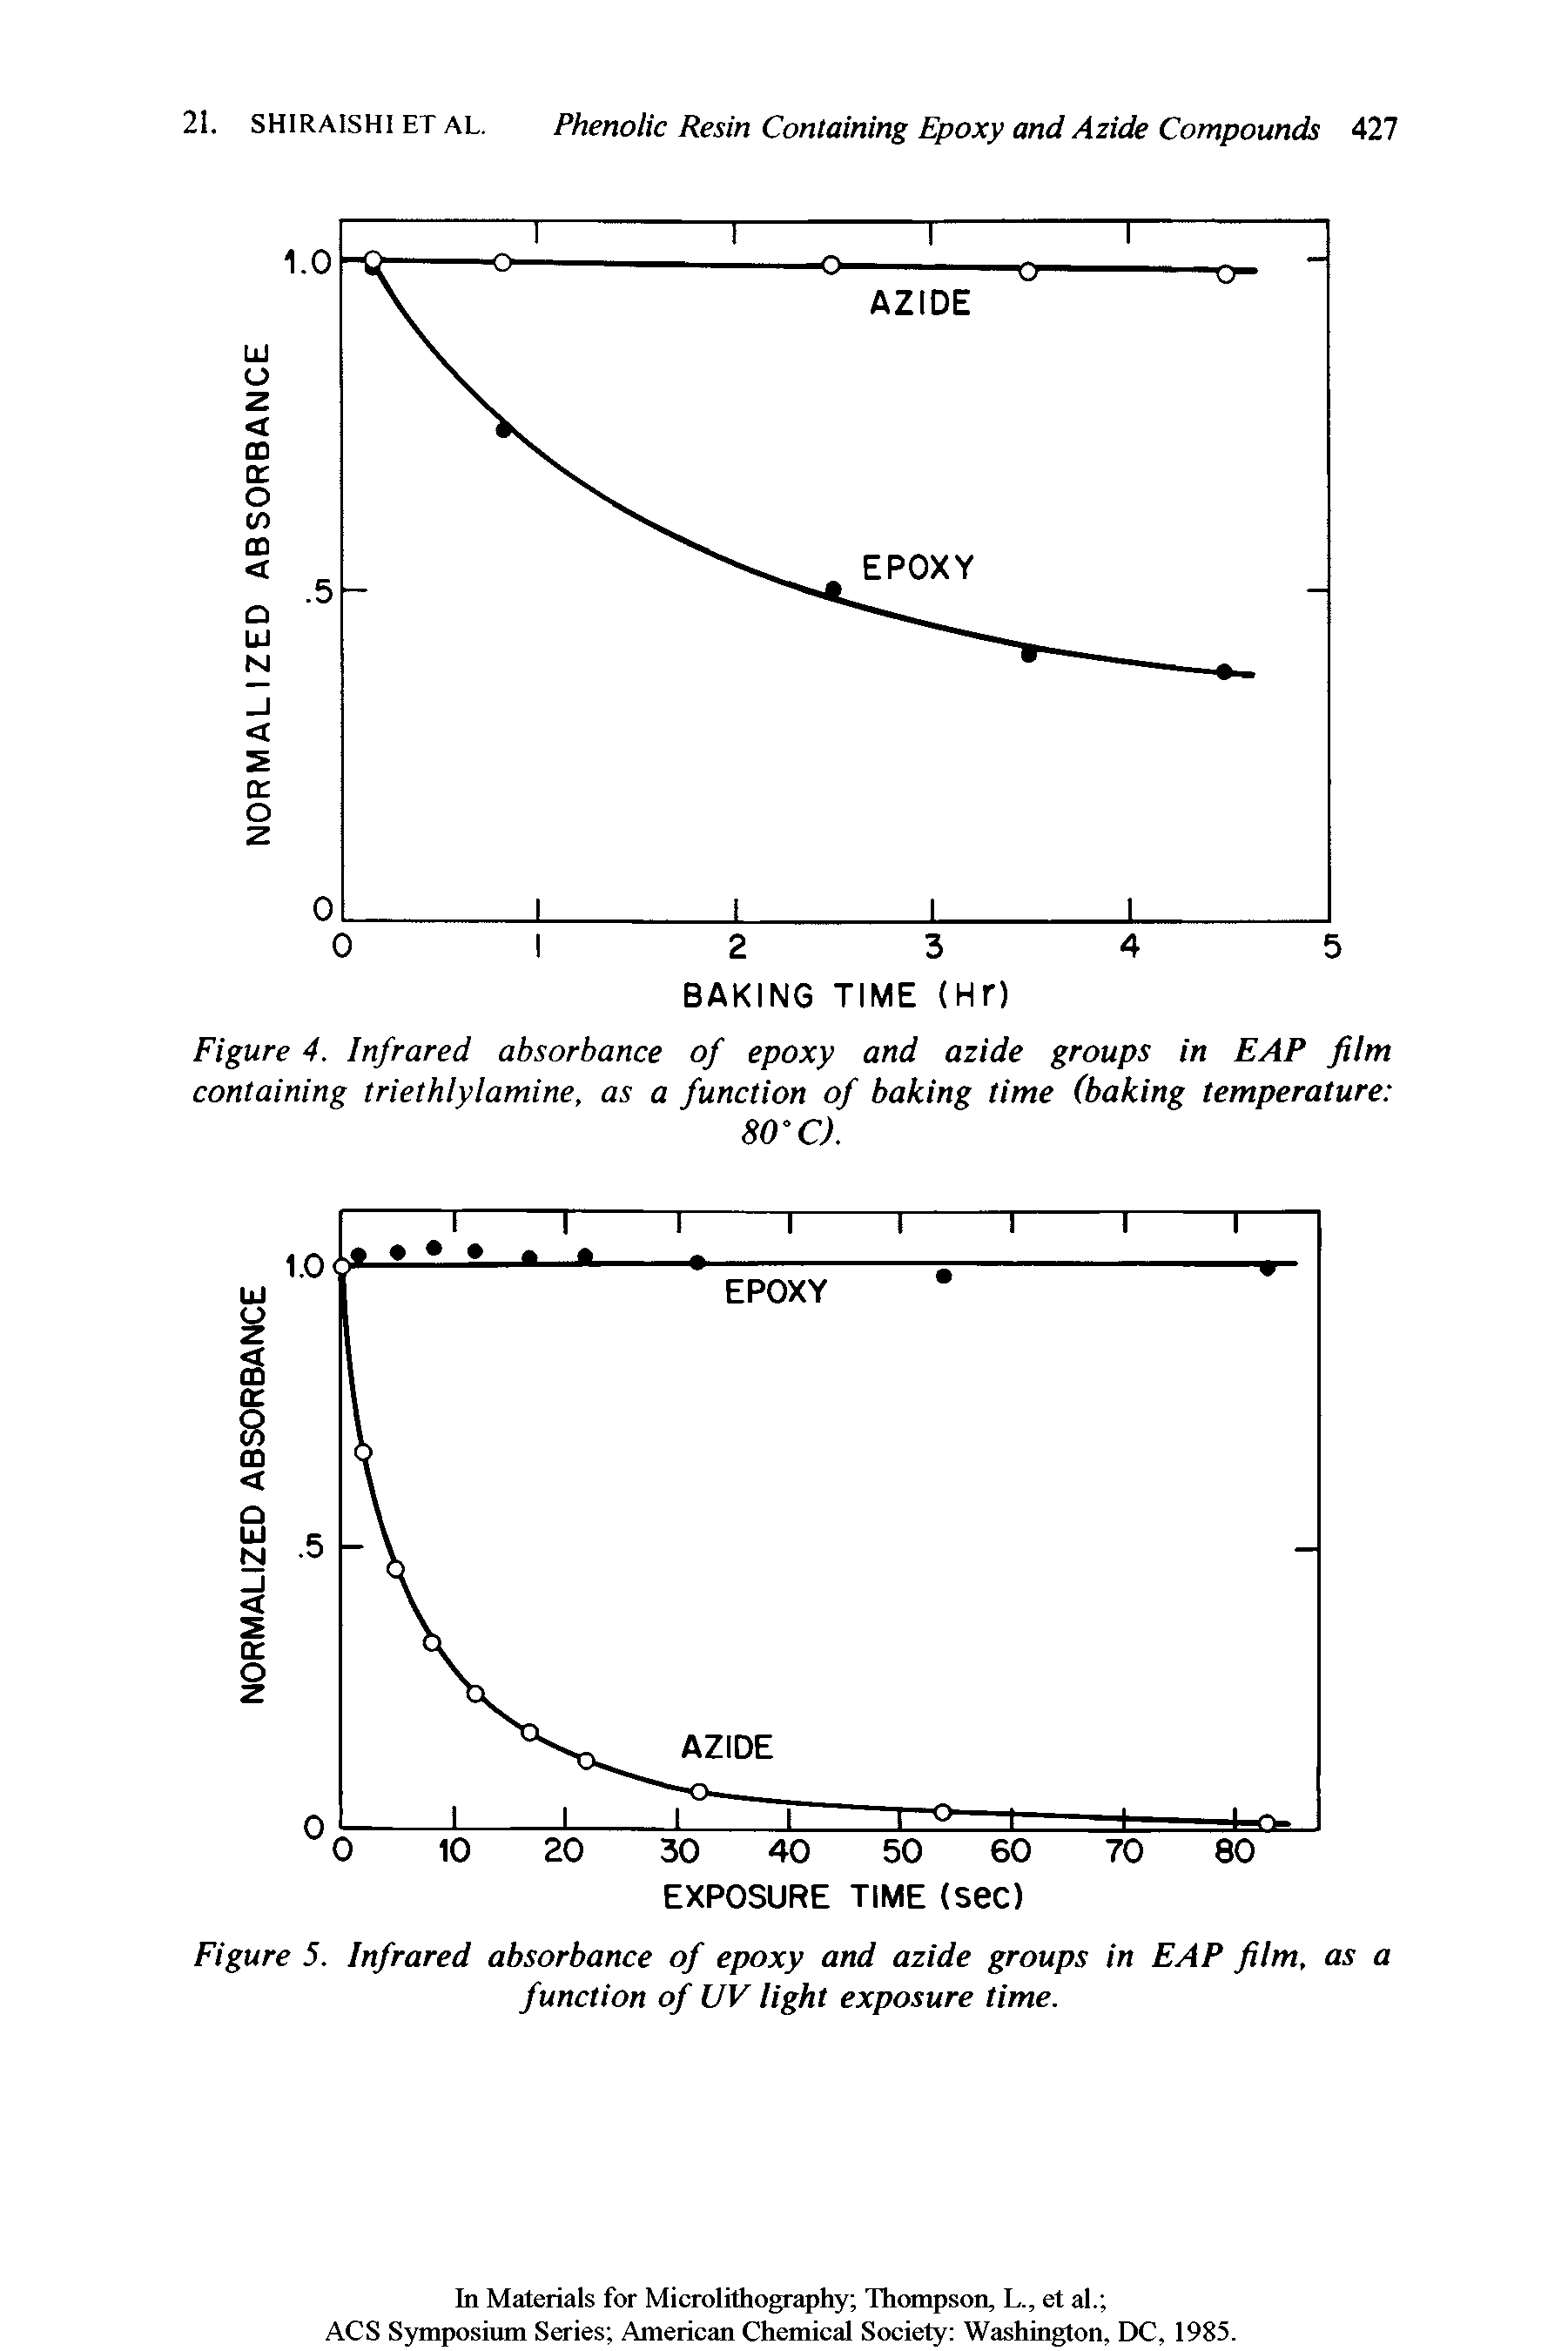 Figure 5. Infrared absorbance of epoxy and azide groups in EAP film, as a function of UV light exposure time.